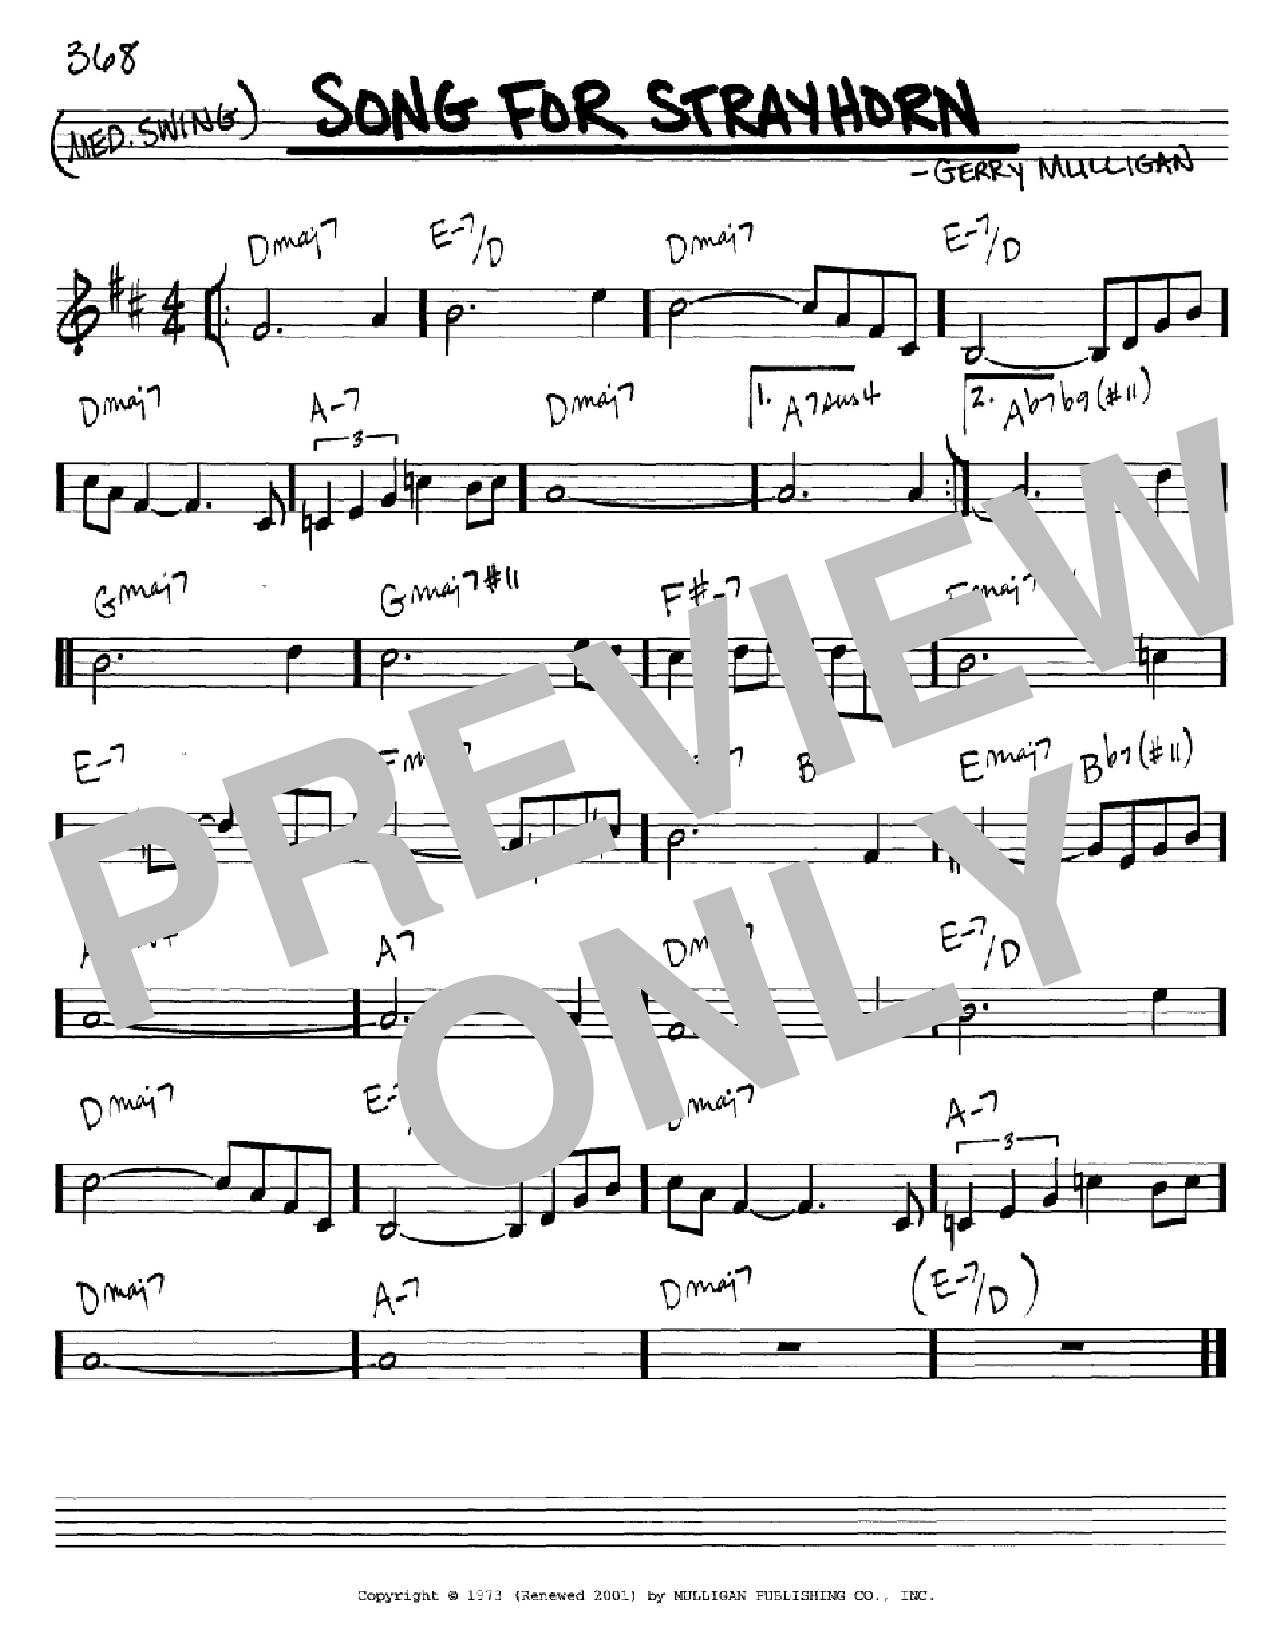 Gerry Mulligan Song For Strayhorn sheet music notes printable PDF score